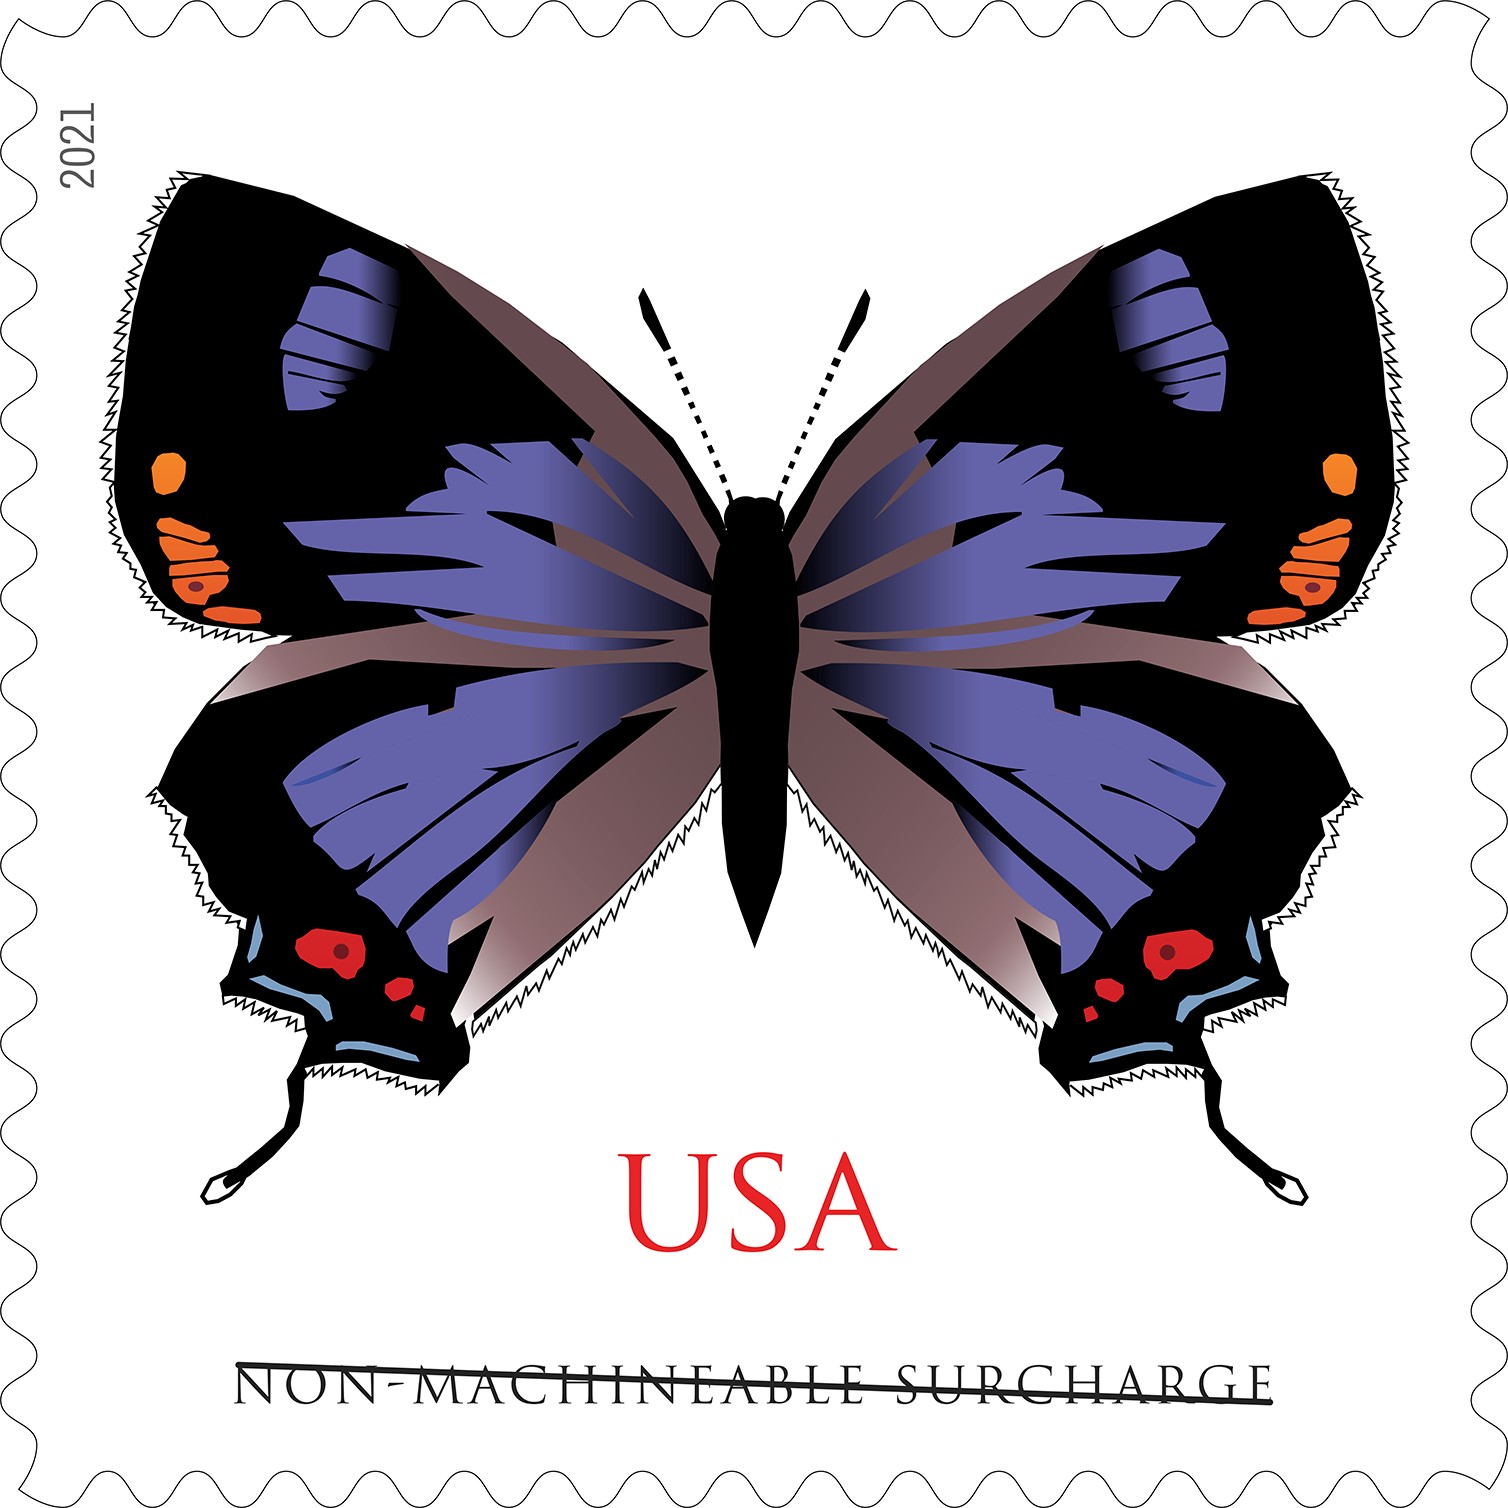 Hairstreak Butterfly stamp